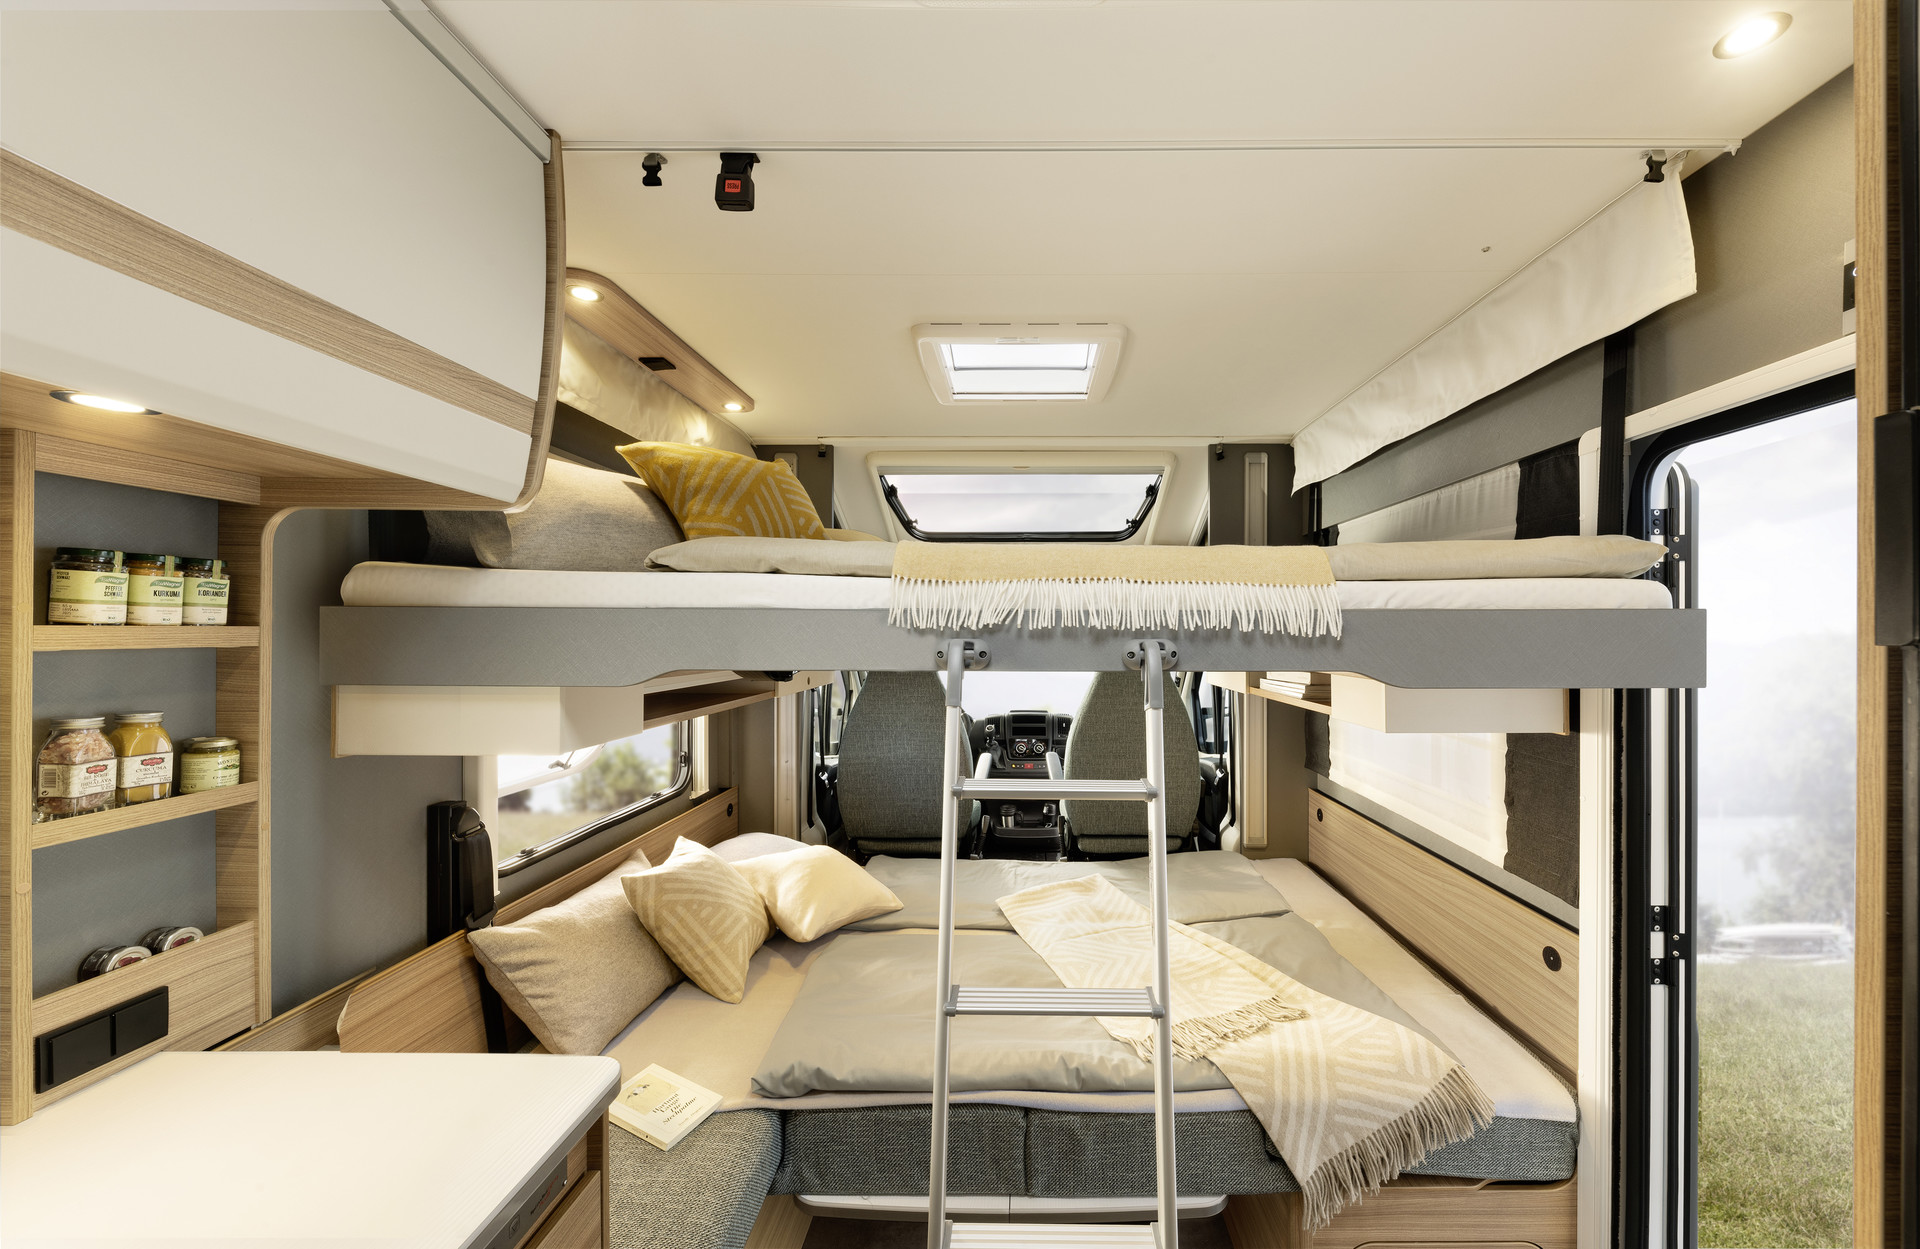 Four sleeping berths are also possible – move the pull-down bed bed to the middle position and convert the seating lounge into an extra bed. • T 6762